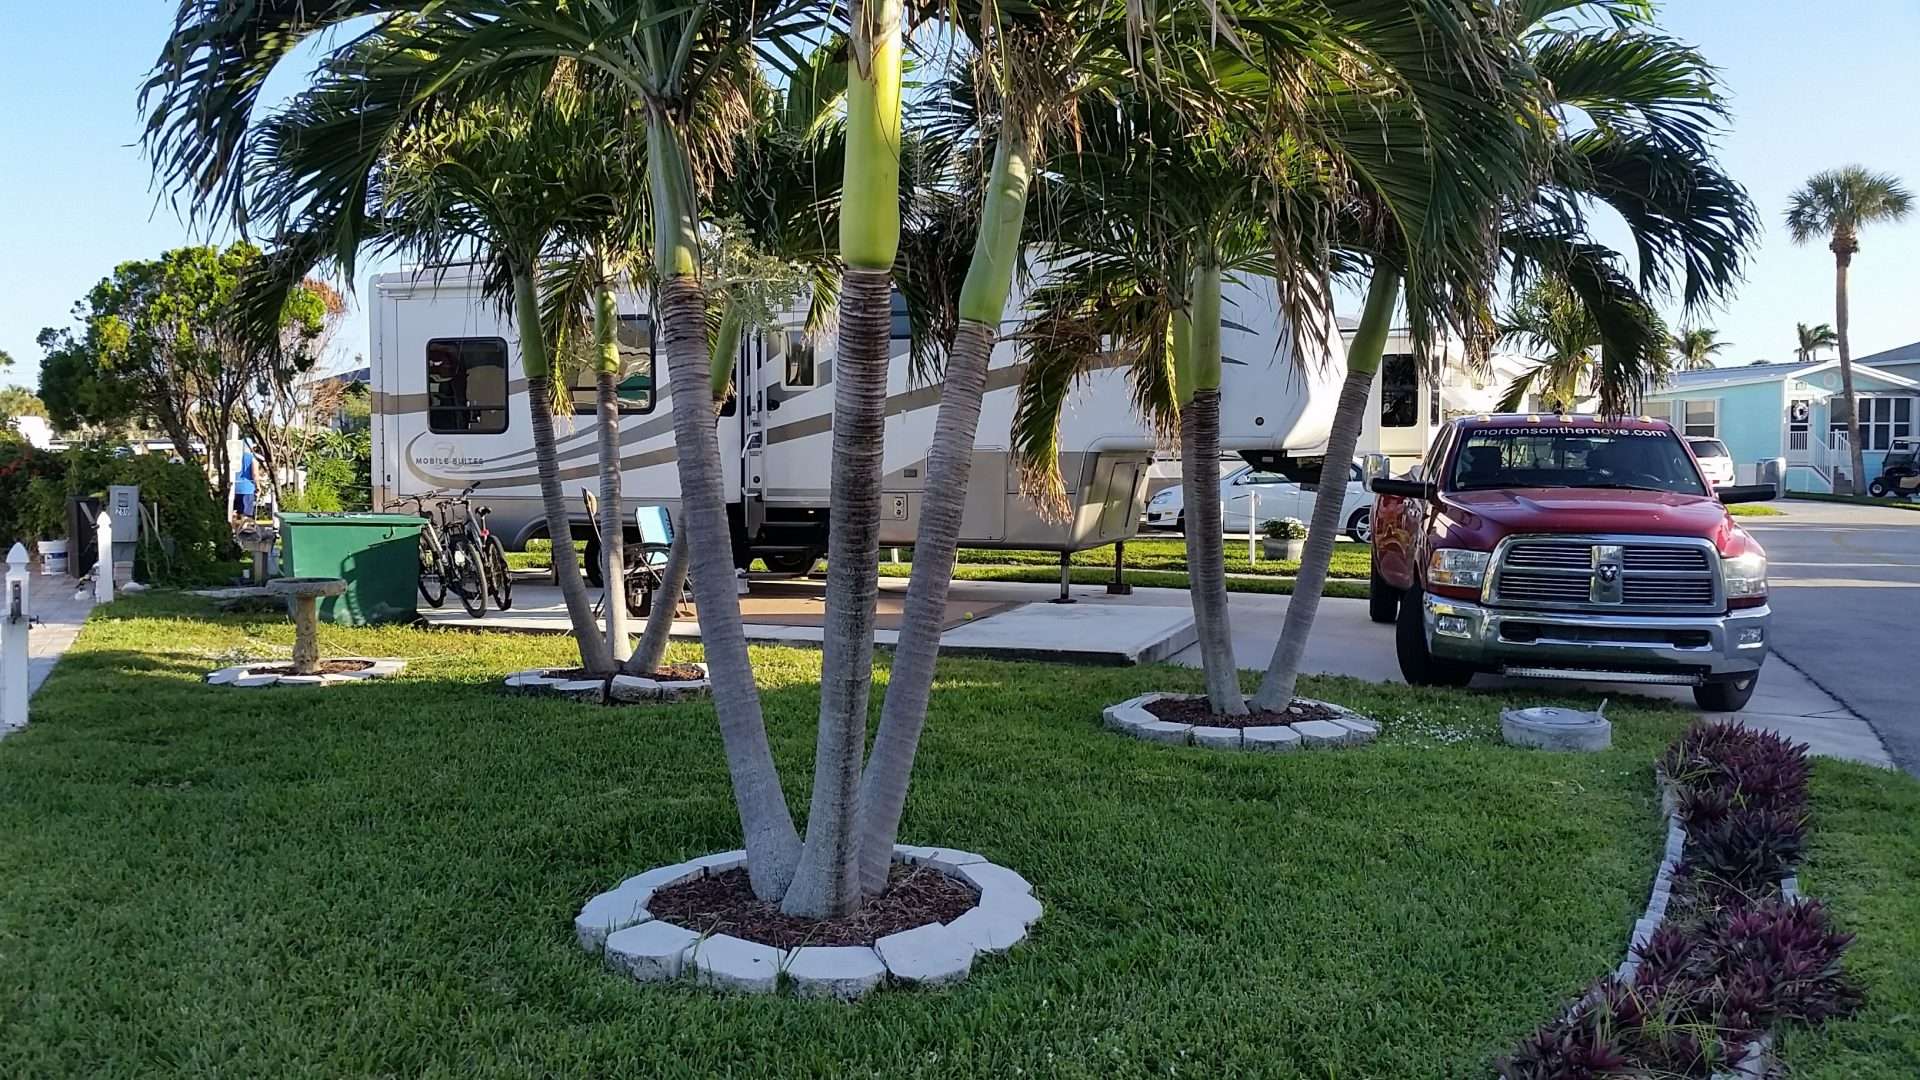 Fifth wheel RV parked next to palm tree in West Palm Beach